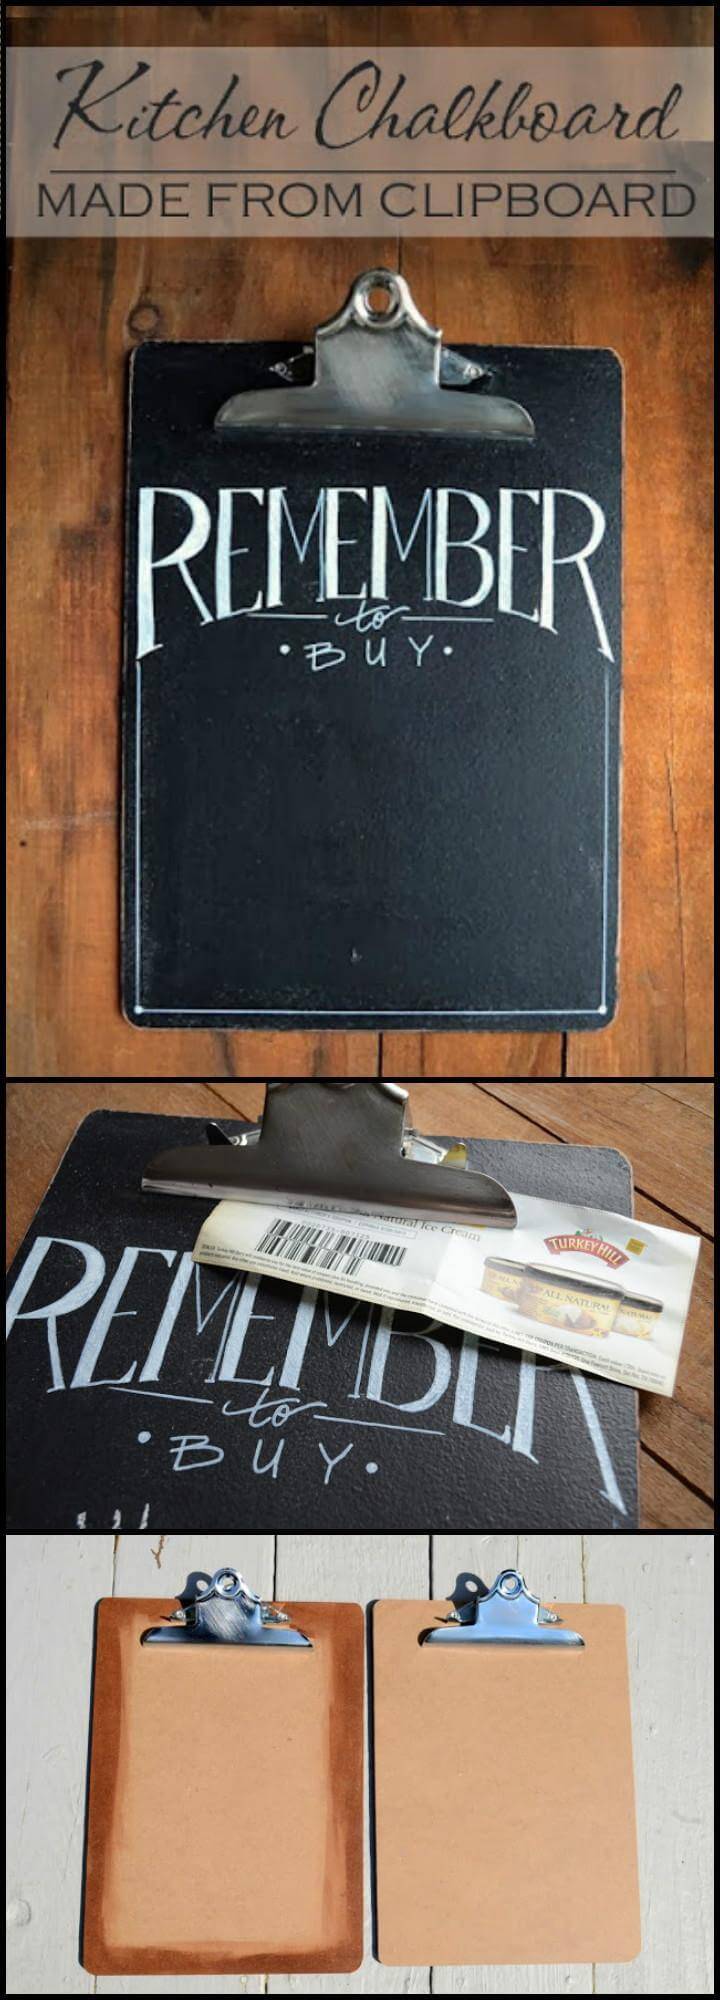 kitchen chalkboard made from clipboard